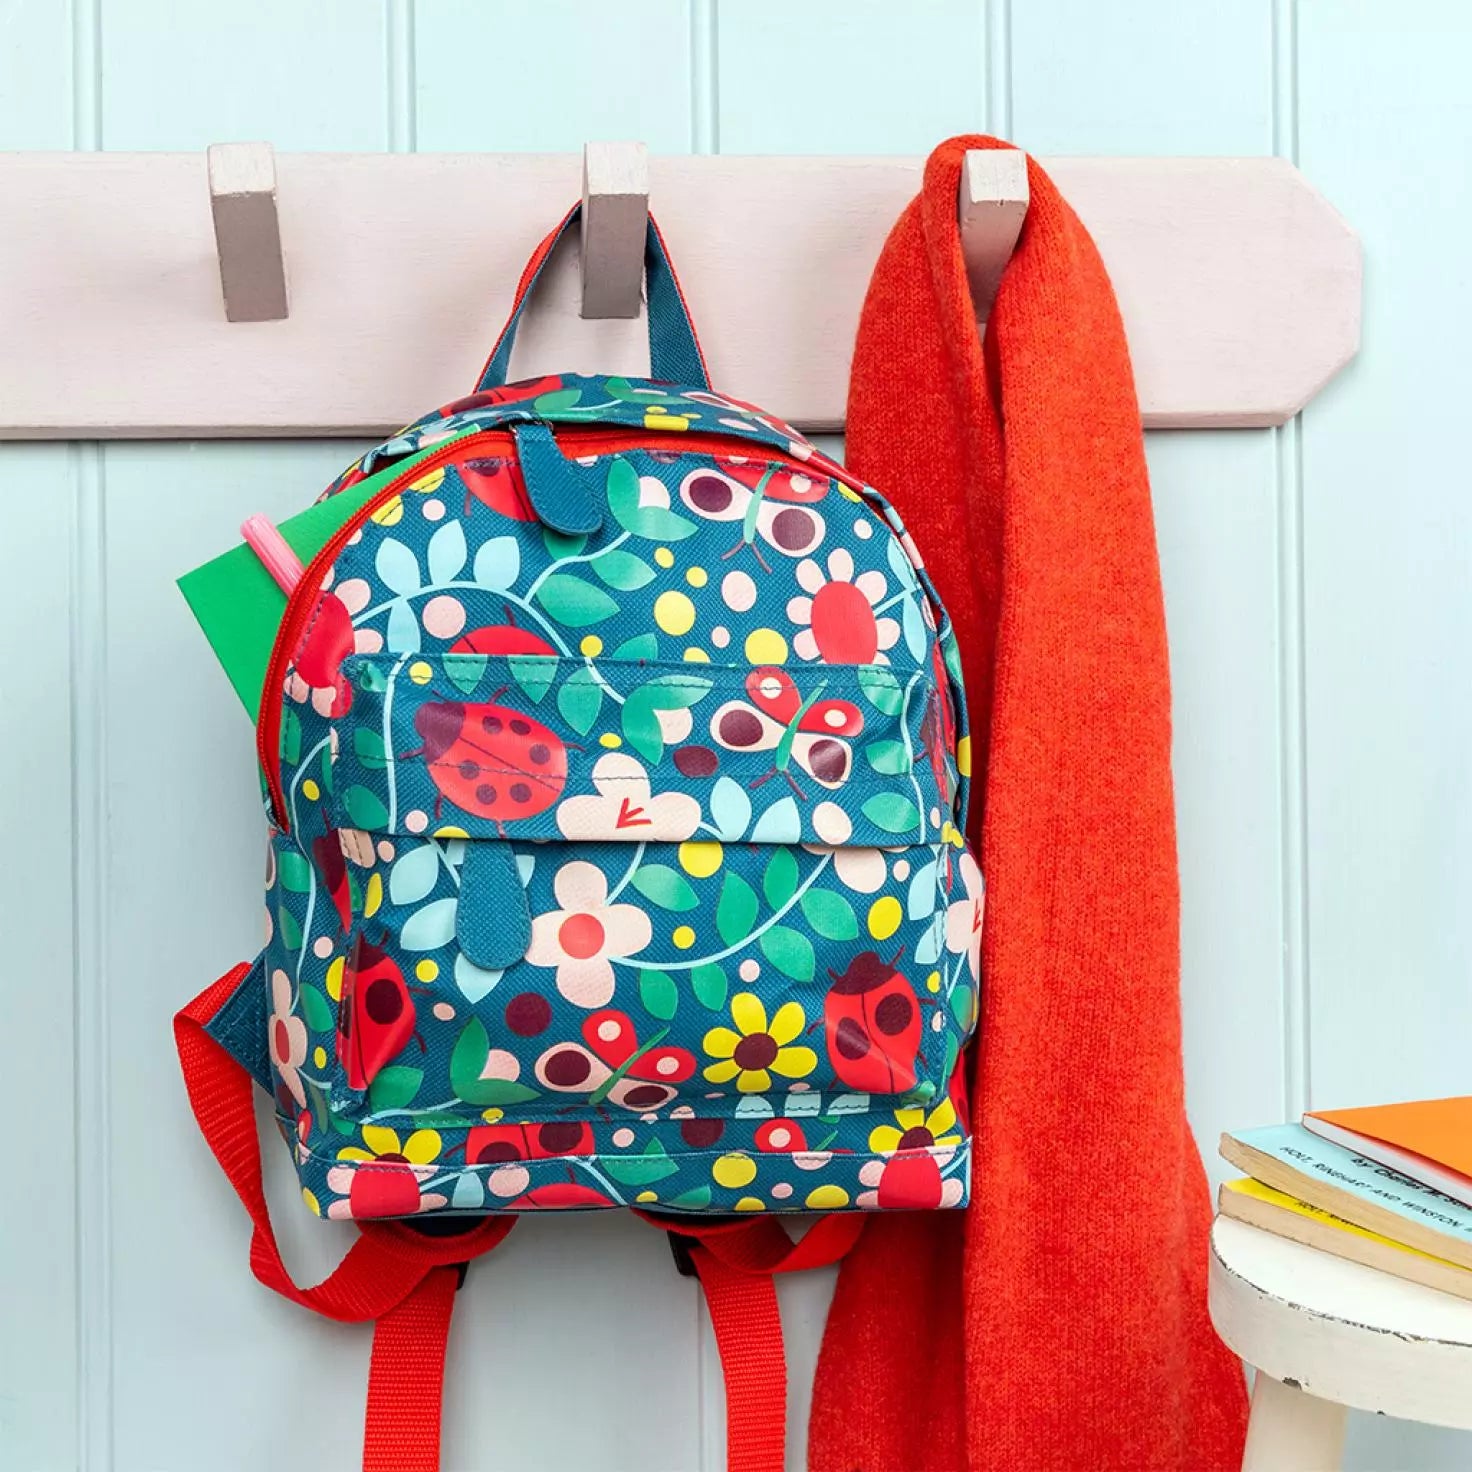 A childs backpack by Rex London, style Ladybird, in blue with multi ladybird and floral print. Two compartments with zip fastening. Lifestyle image.